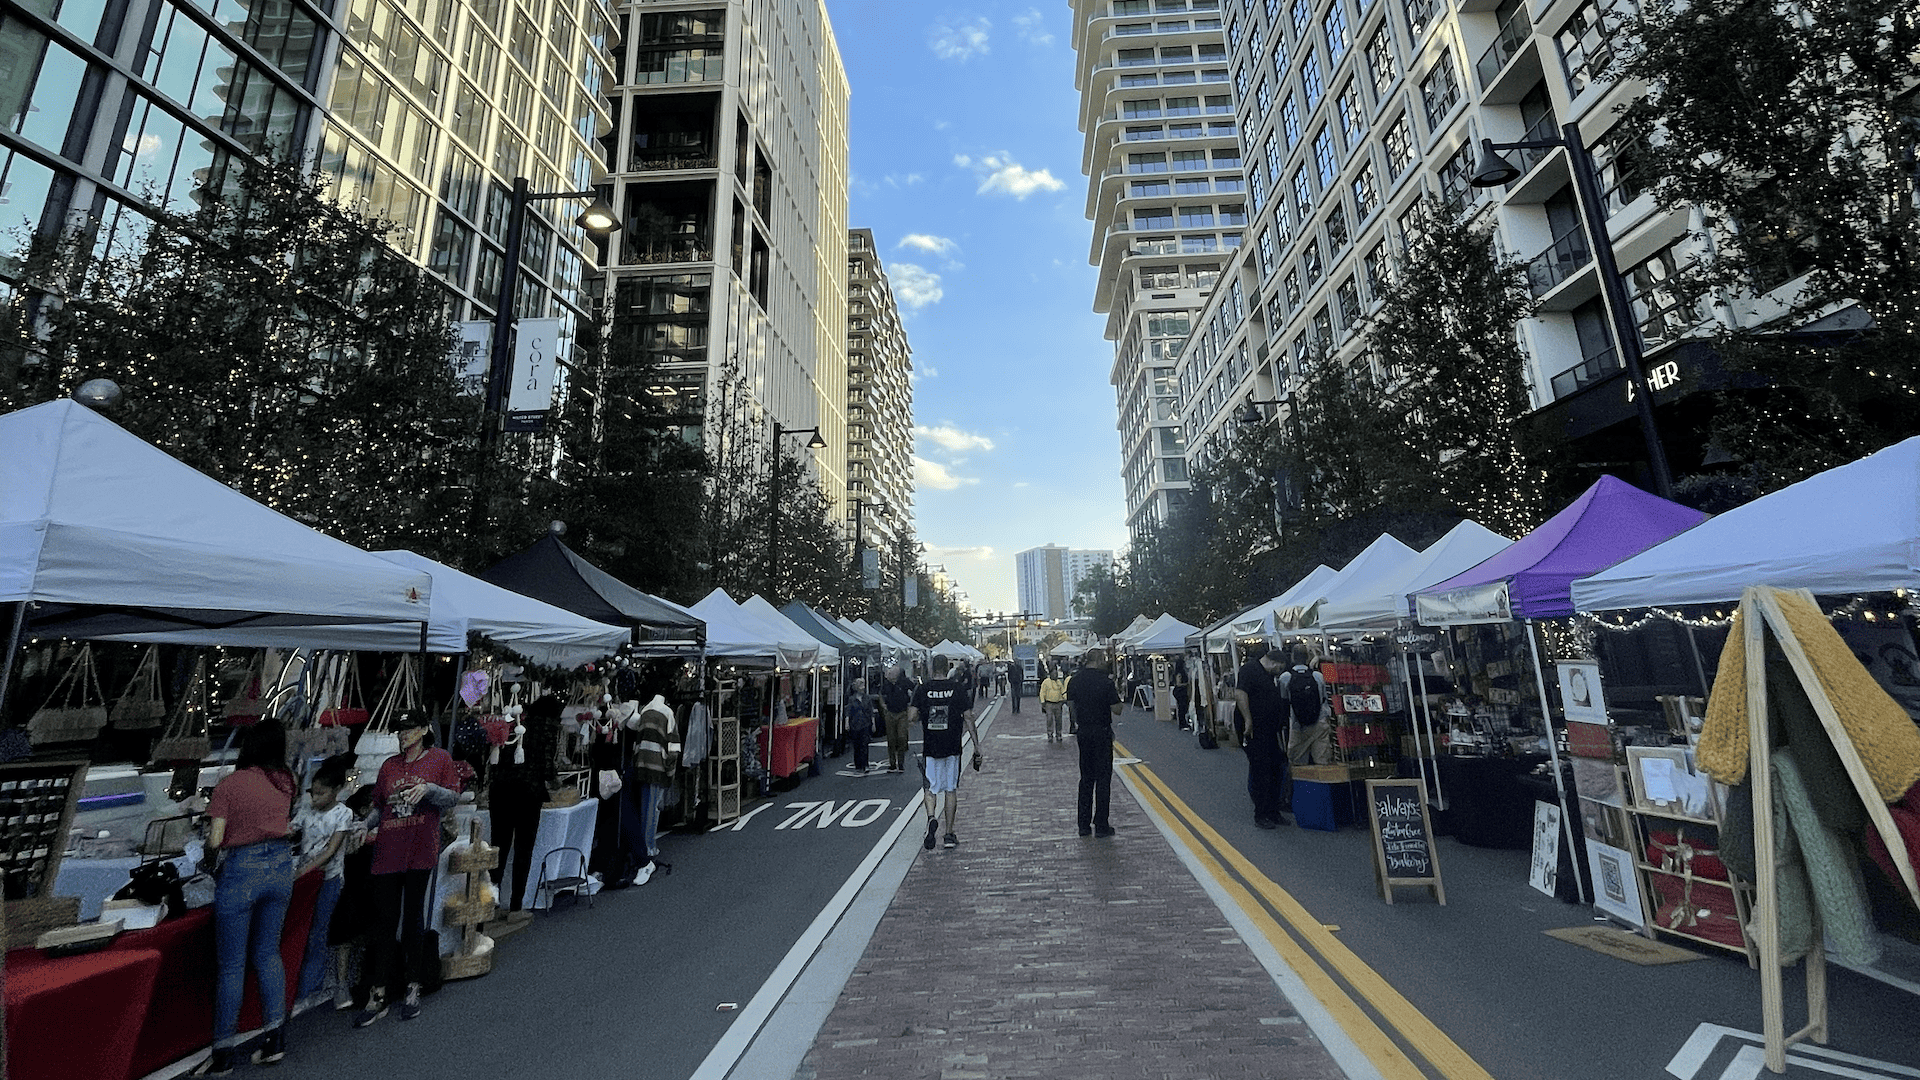 an open air market in a downtown area